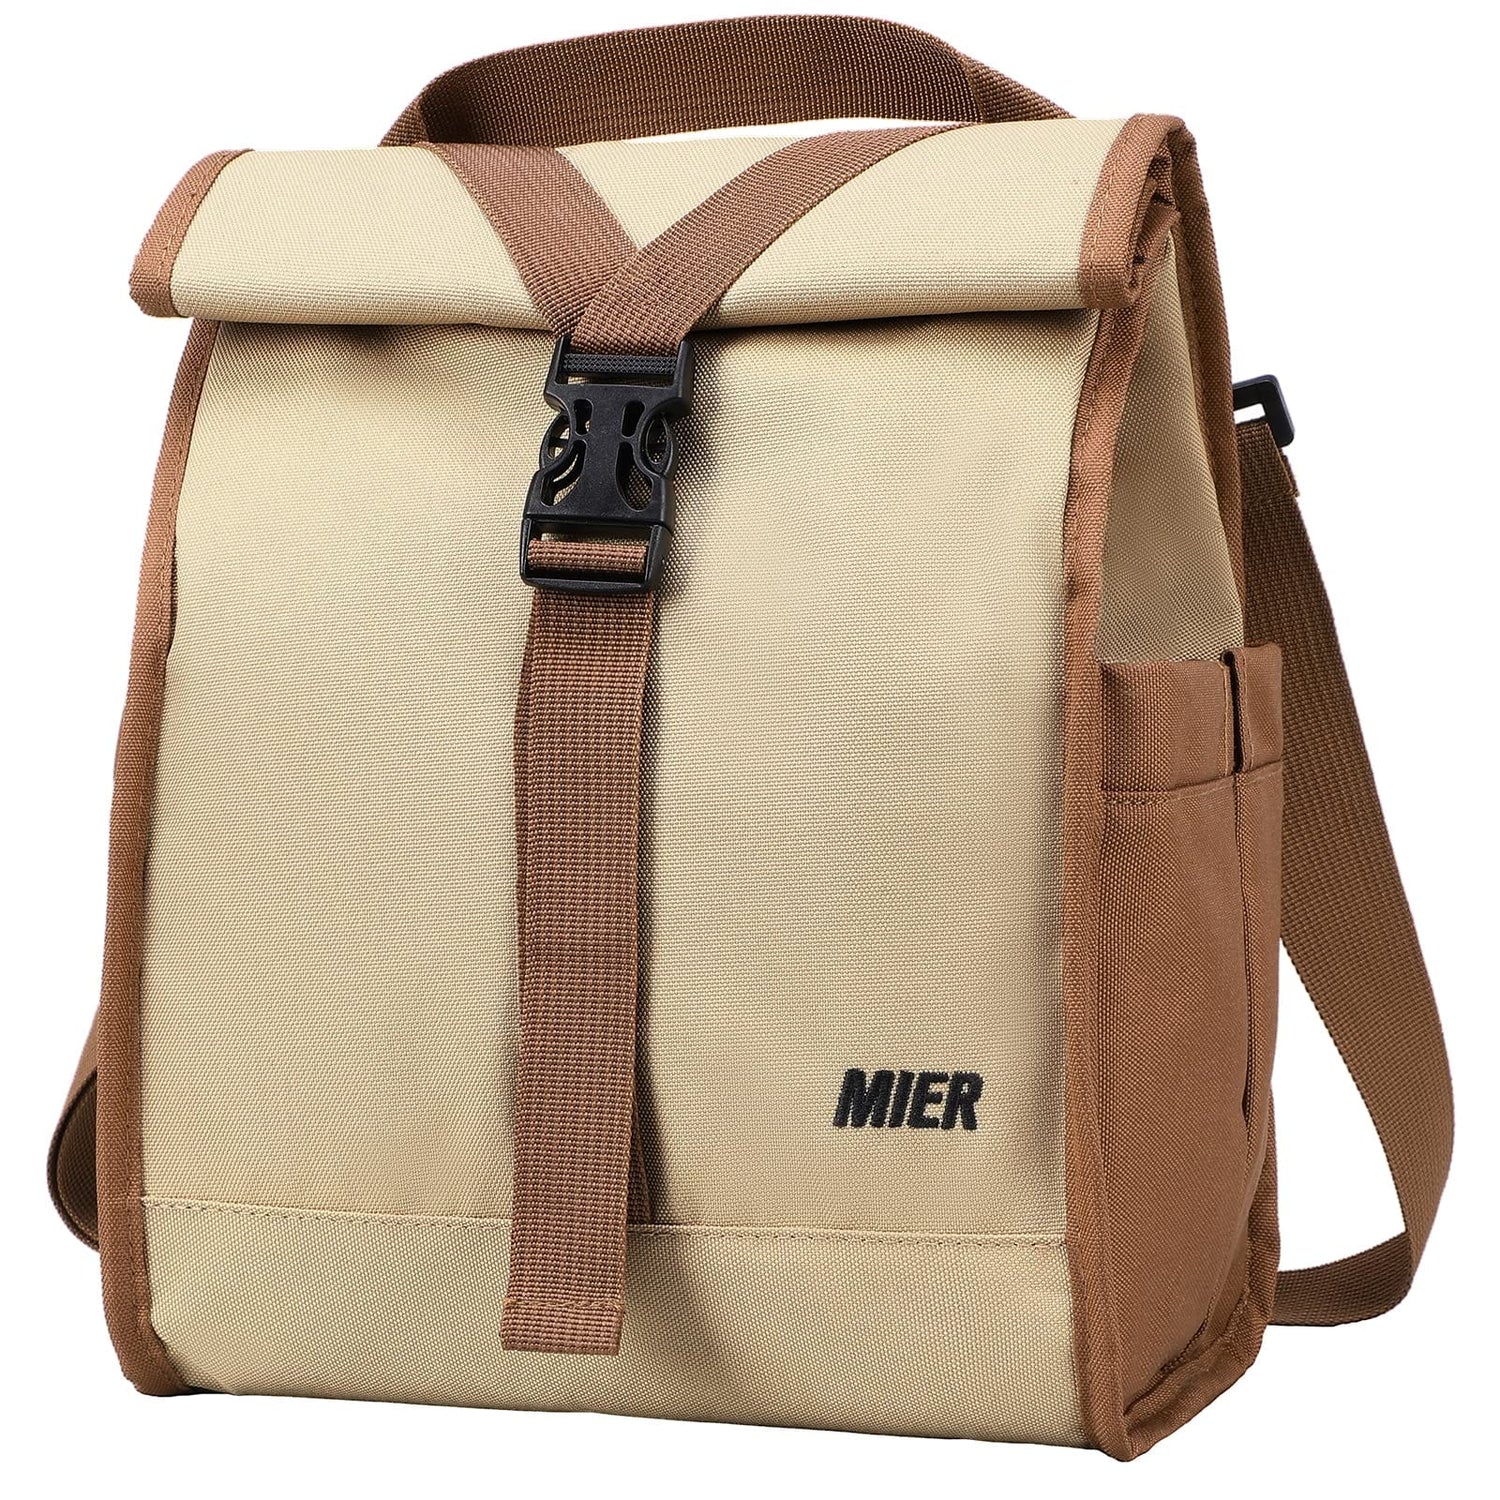 Insulated Lunch Bag Roll Top Lunch Box for Women Men Fashionable Lunch Bag Khaki MIER